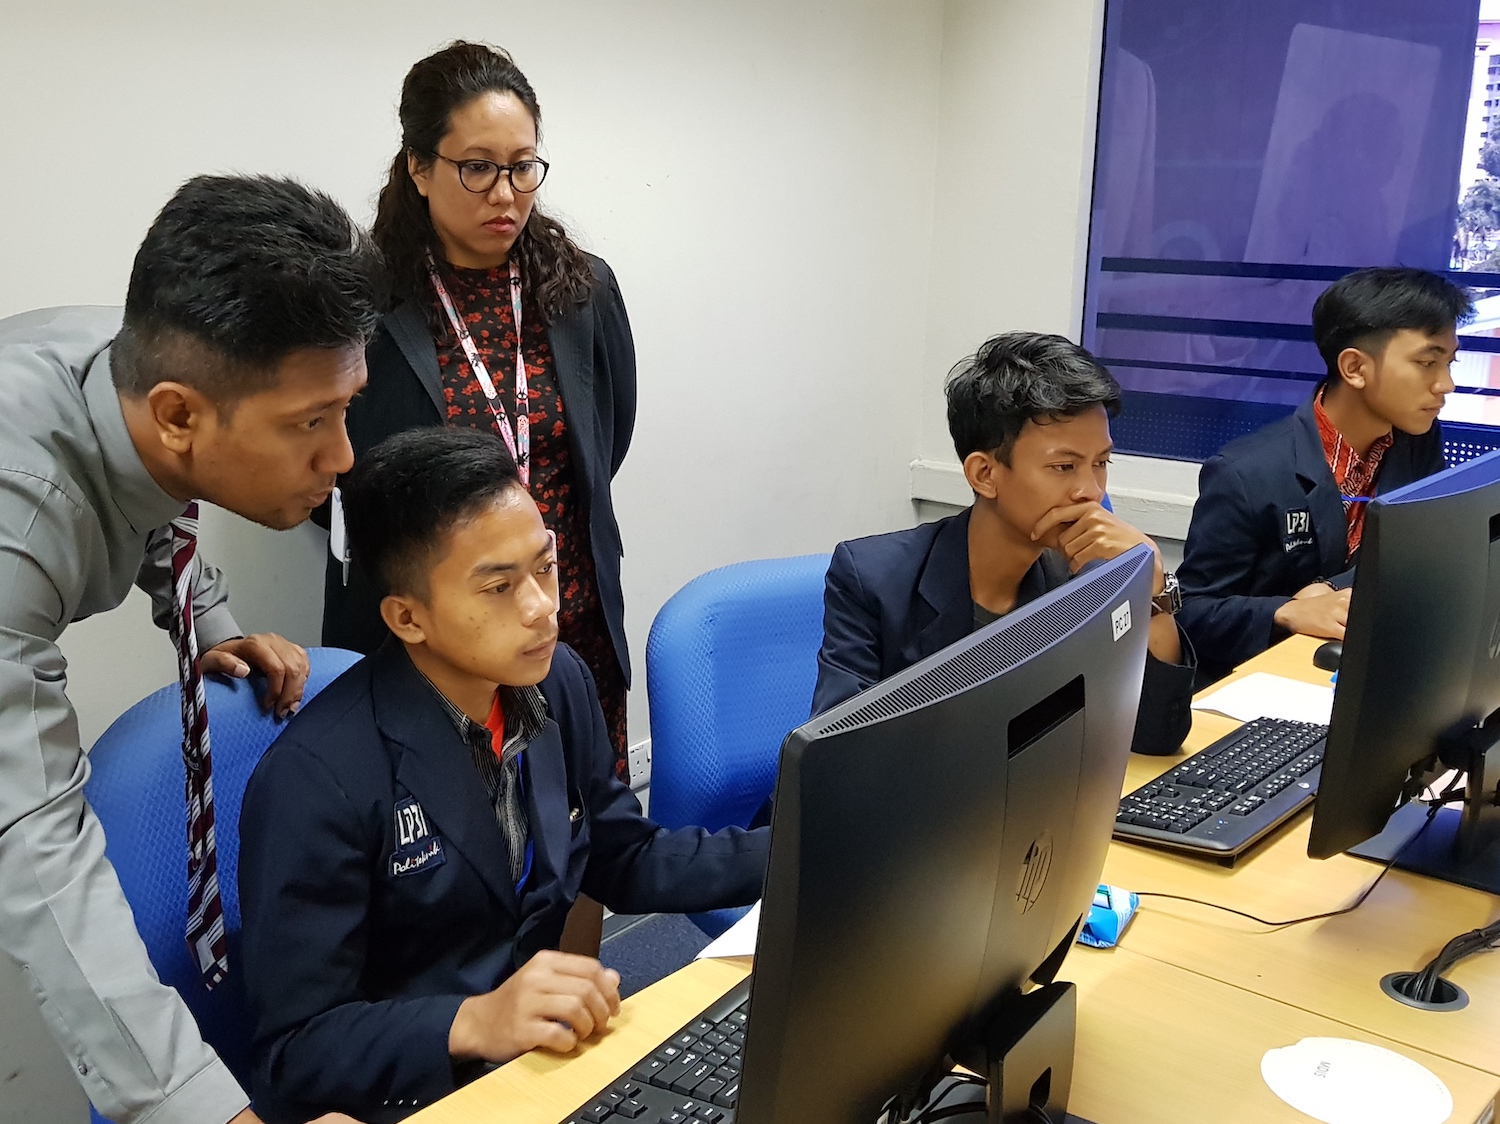 MDIS lecturers helping a student with technical difficulties on the computer.